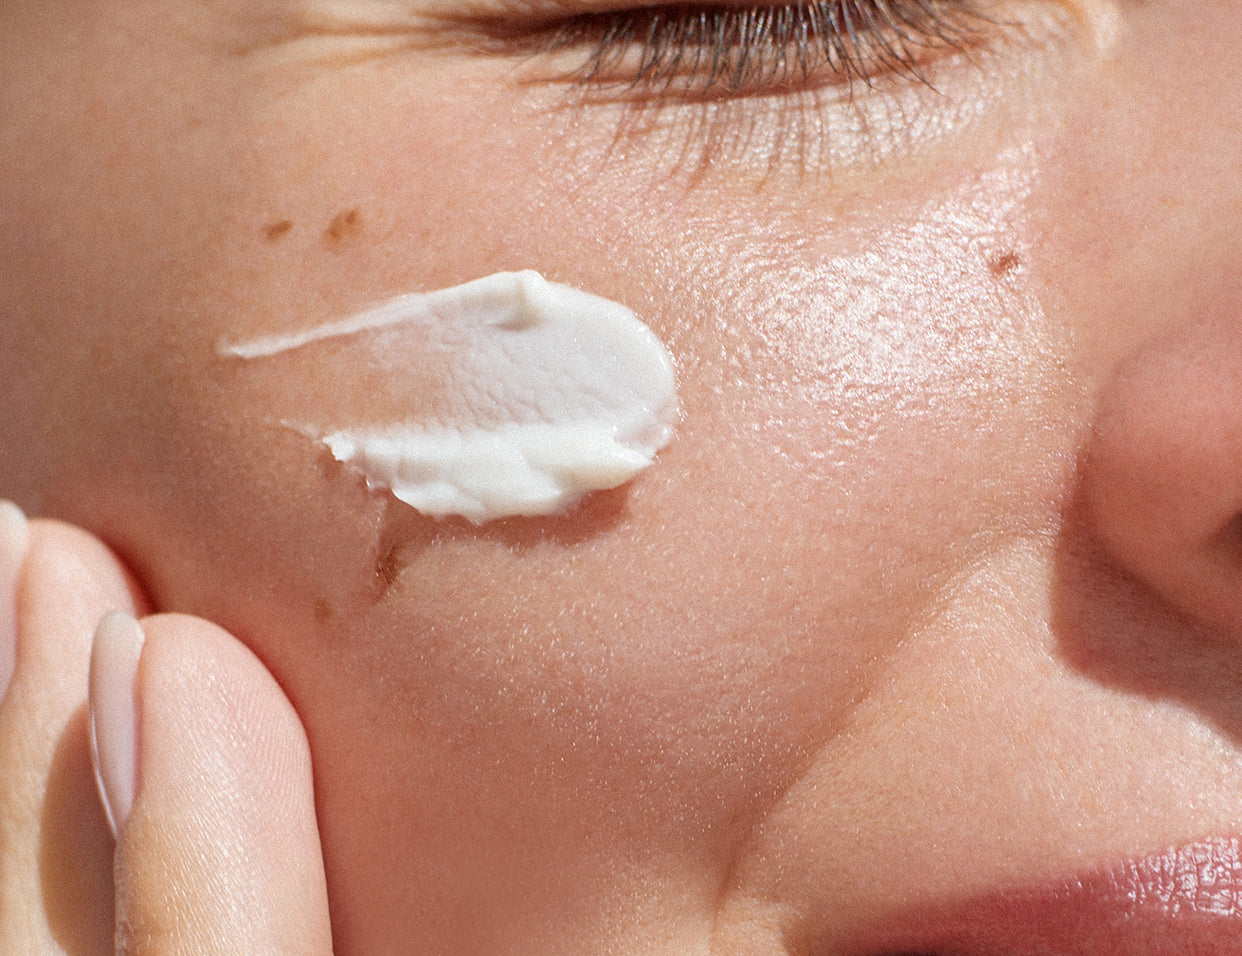 cosmetic ingredients that help prevent moisture loss